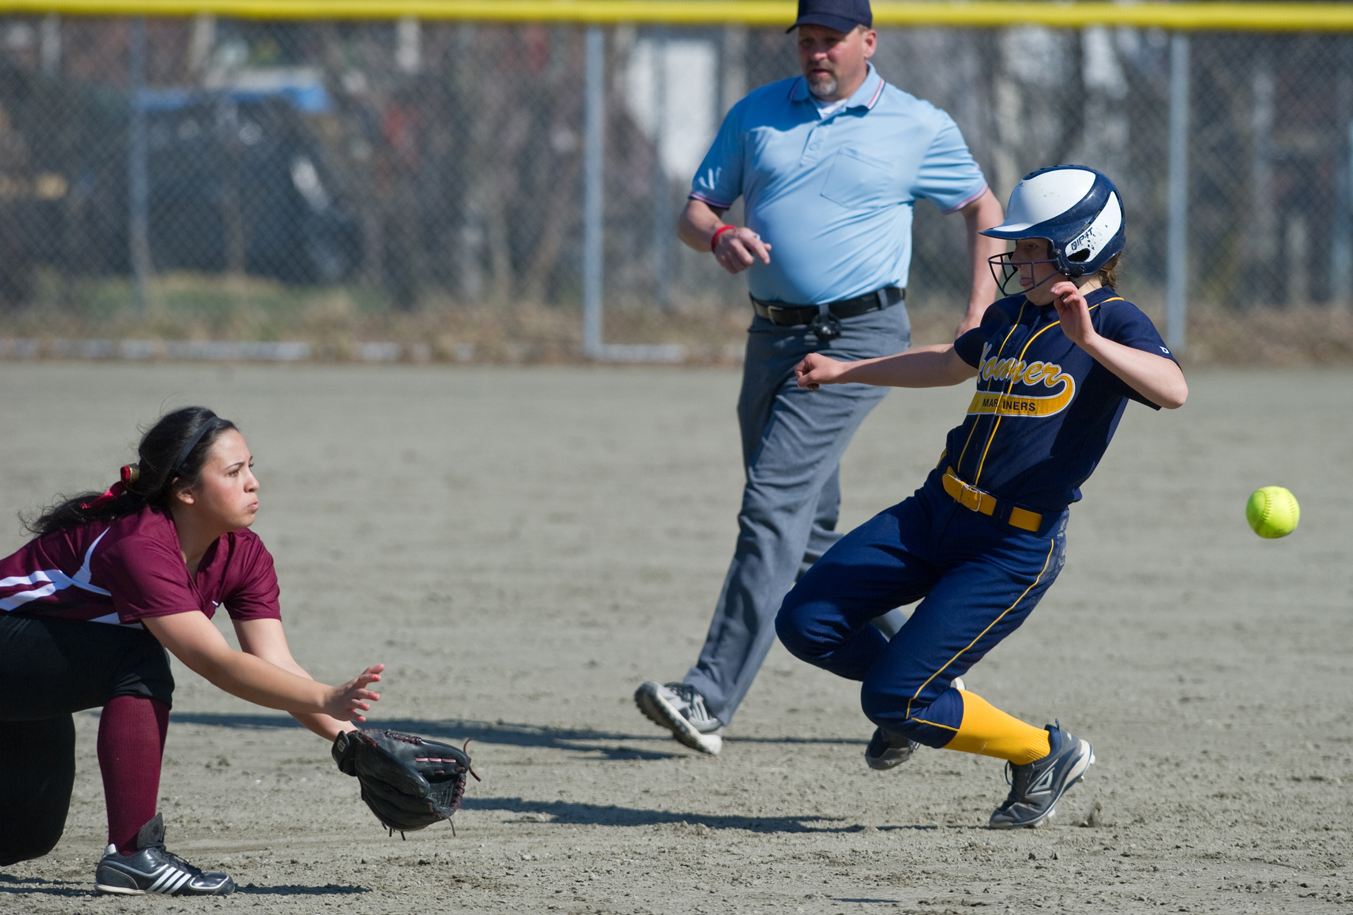 Homer’s Maggie LaRue, right, beats the throw to second as Ketchikan’s Jazmyn Nedzwecky readies for the ball in a May 1 game in Juneau. Ketchikan won the game 9-1. Field umpire Mark Potts is there to make the call.-Michael Penn, Juneau Empire